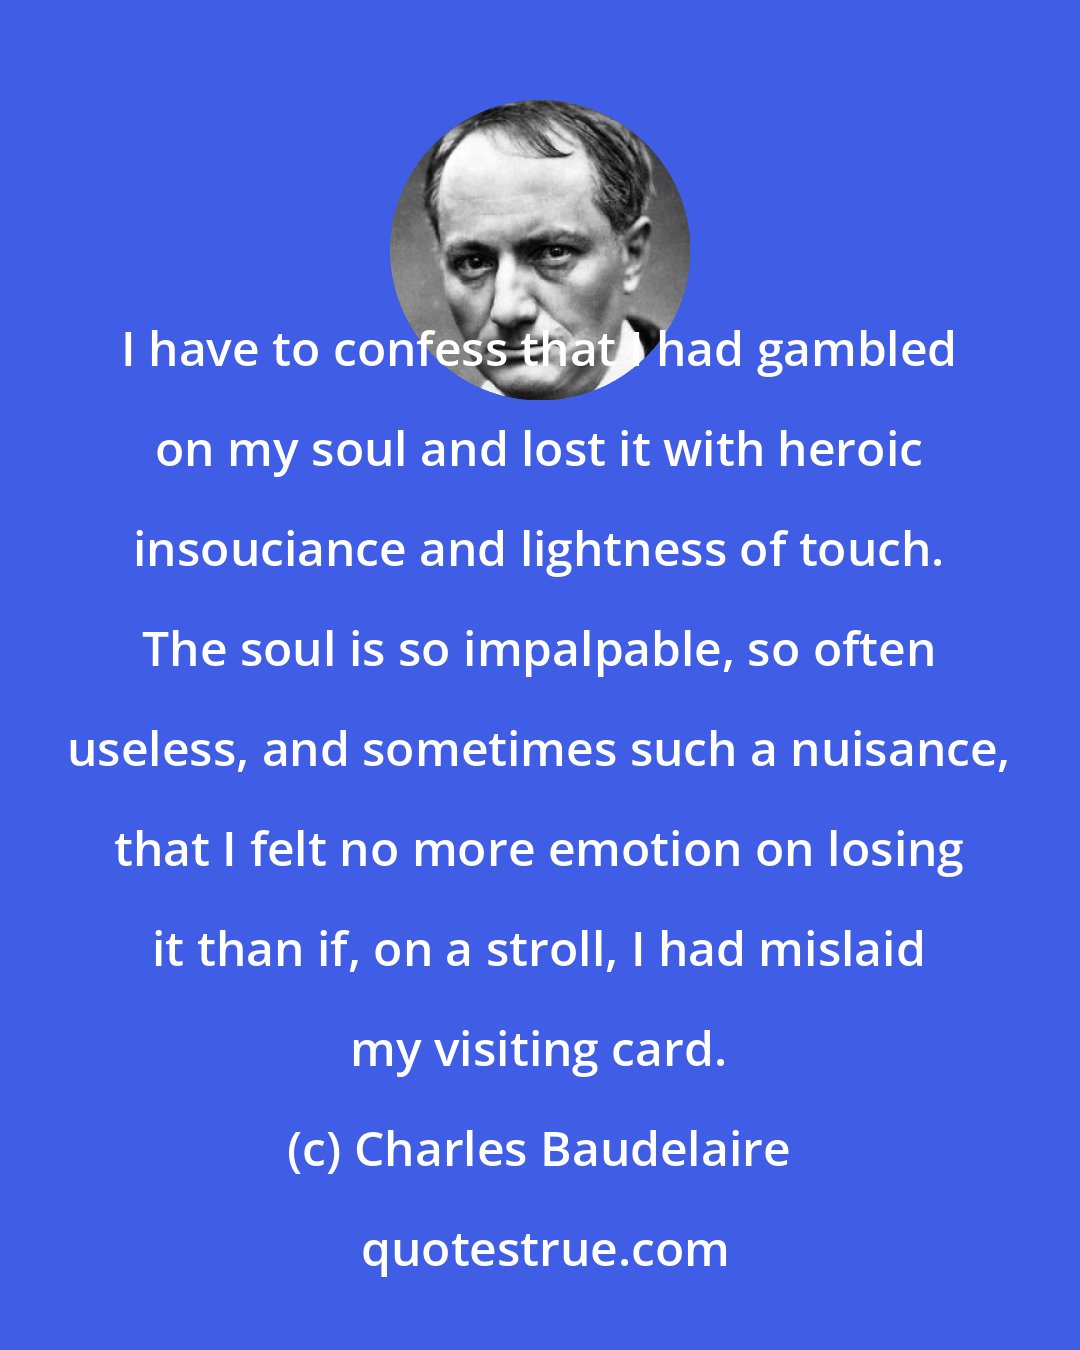 Charles Baudelaire: I have to confess that I had gambled on my soul and lost it with heroic insouciance and lightness of touch. The soul is so impalpable, so often useless, and sometimes such a nuisance, that I felt no more emotion on losing it than if, on a stroll, I had mislaid my visiting card.